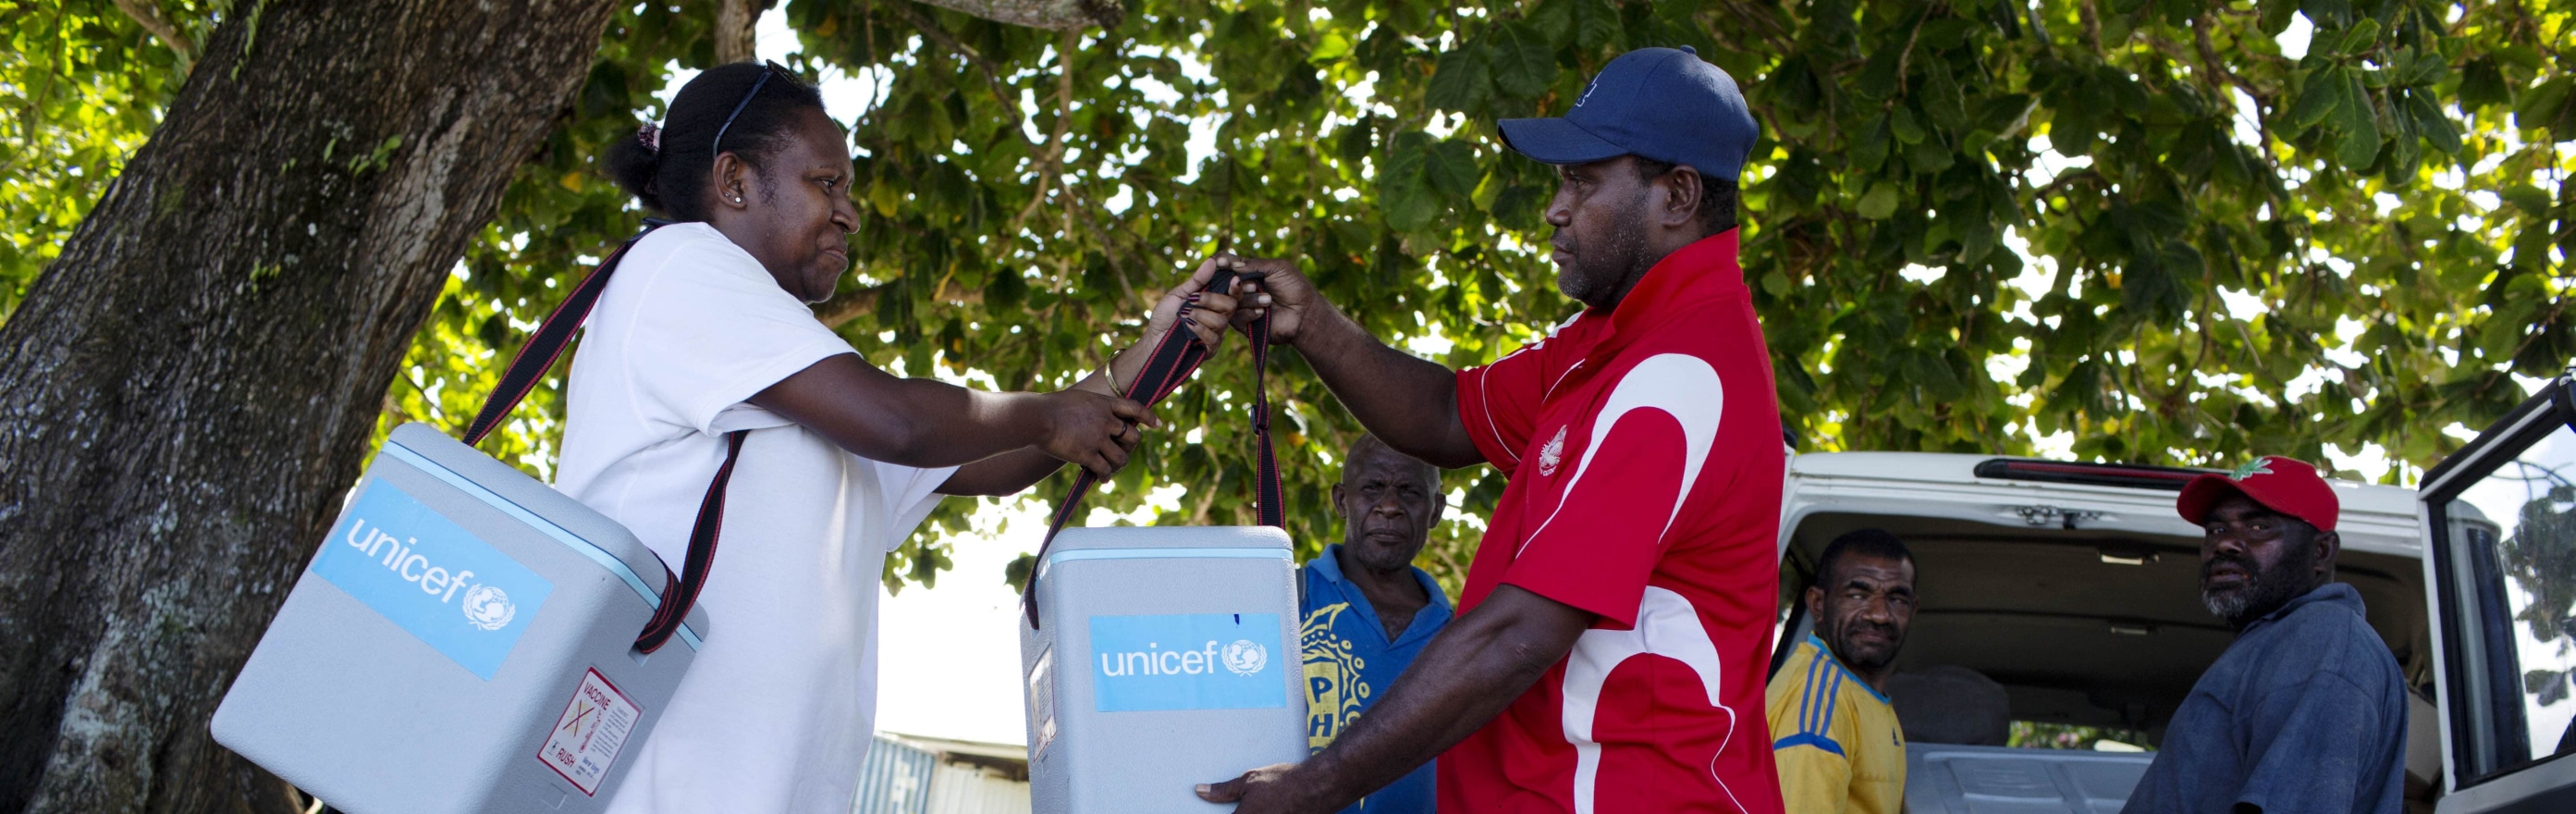 Image of PNG residents helping transport vaccines in coolers from UNICEF